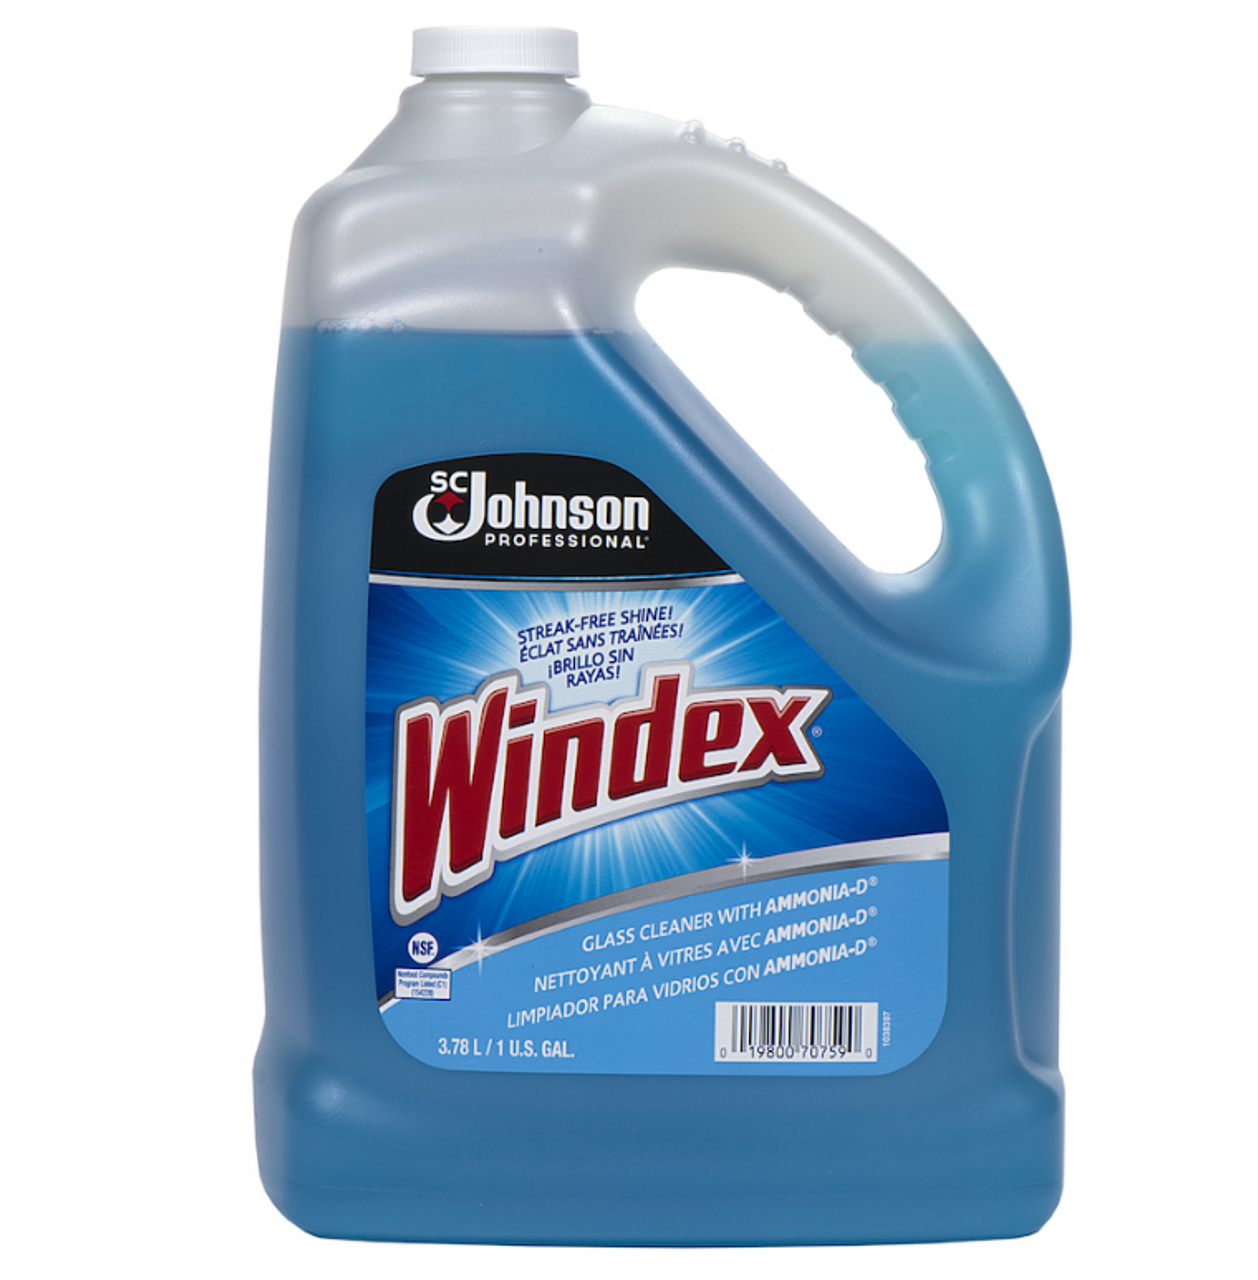 Windex Pro Glass Cleaner with Ammonia-D 1 Gallon (4/Case) - KEVIDKO